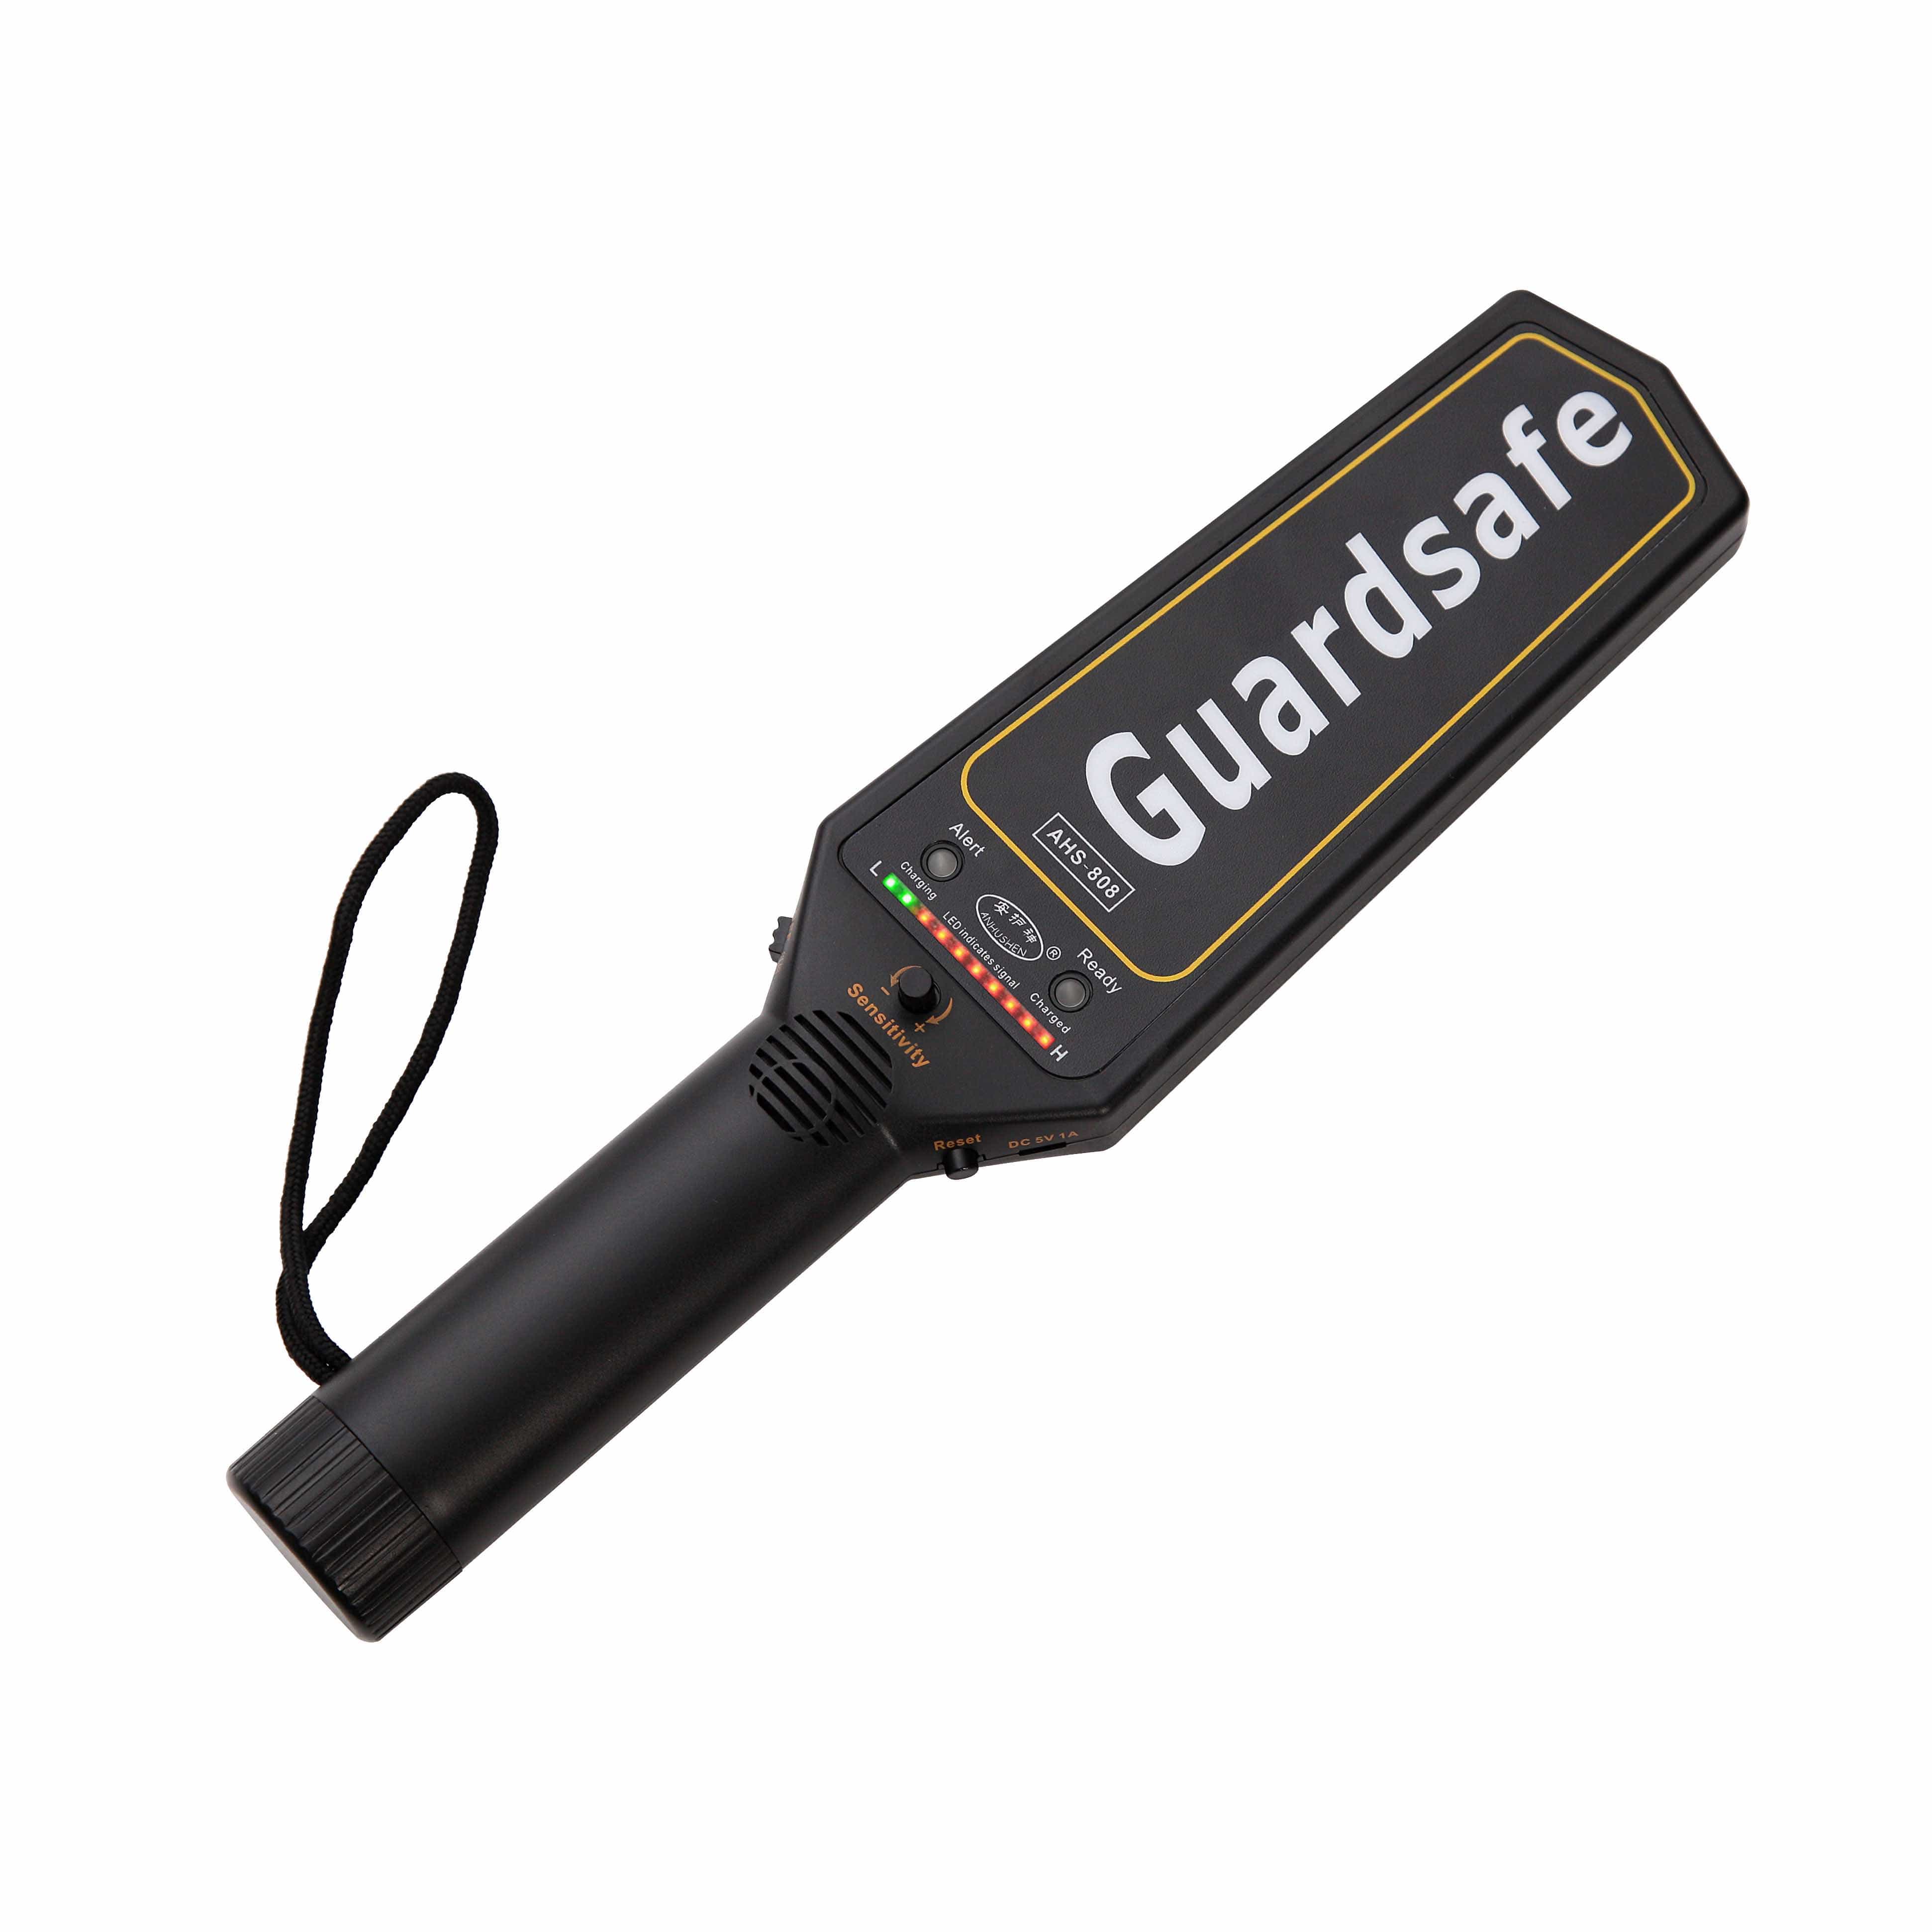 Buy Guardsafe AHS-808PLUS Hand Held Metal Detector on Supply Master Ghana, Accra Safety Barriers Buy Tools hardware Building materials